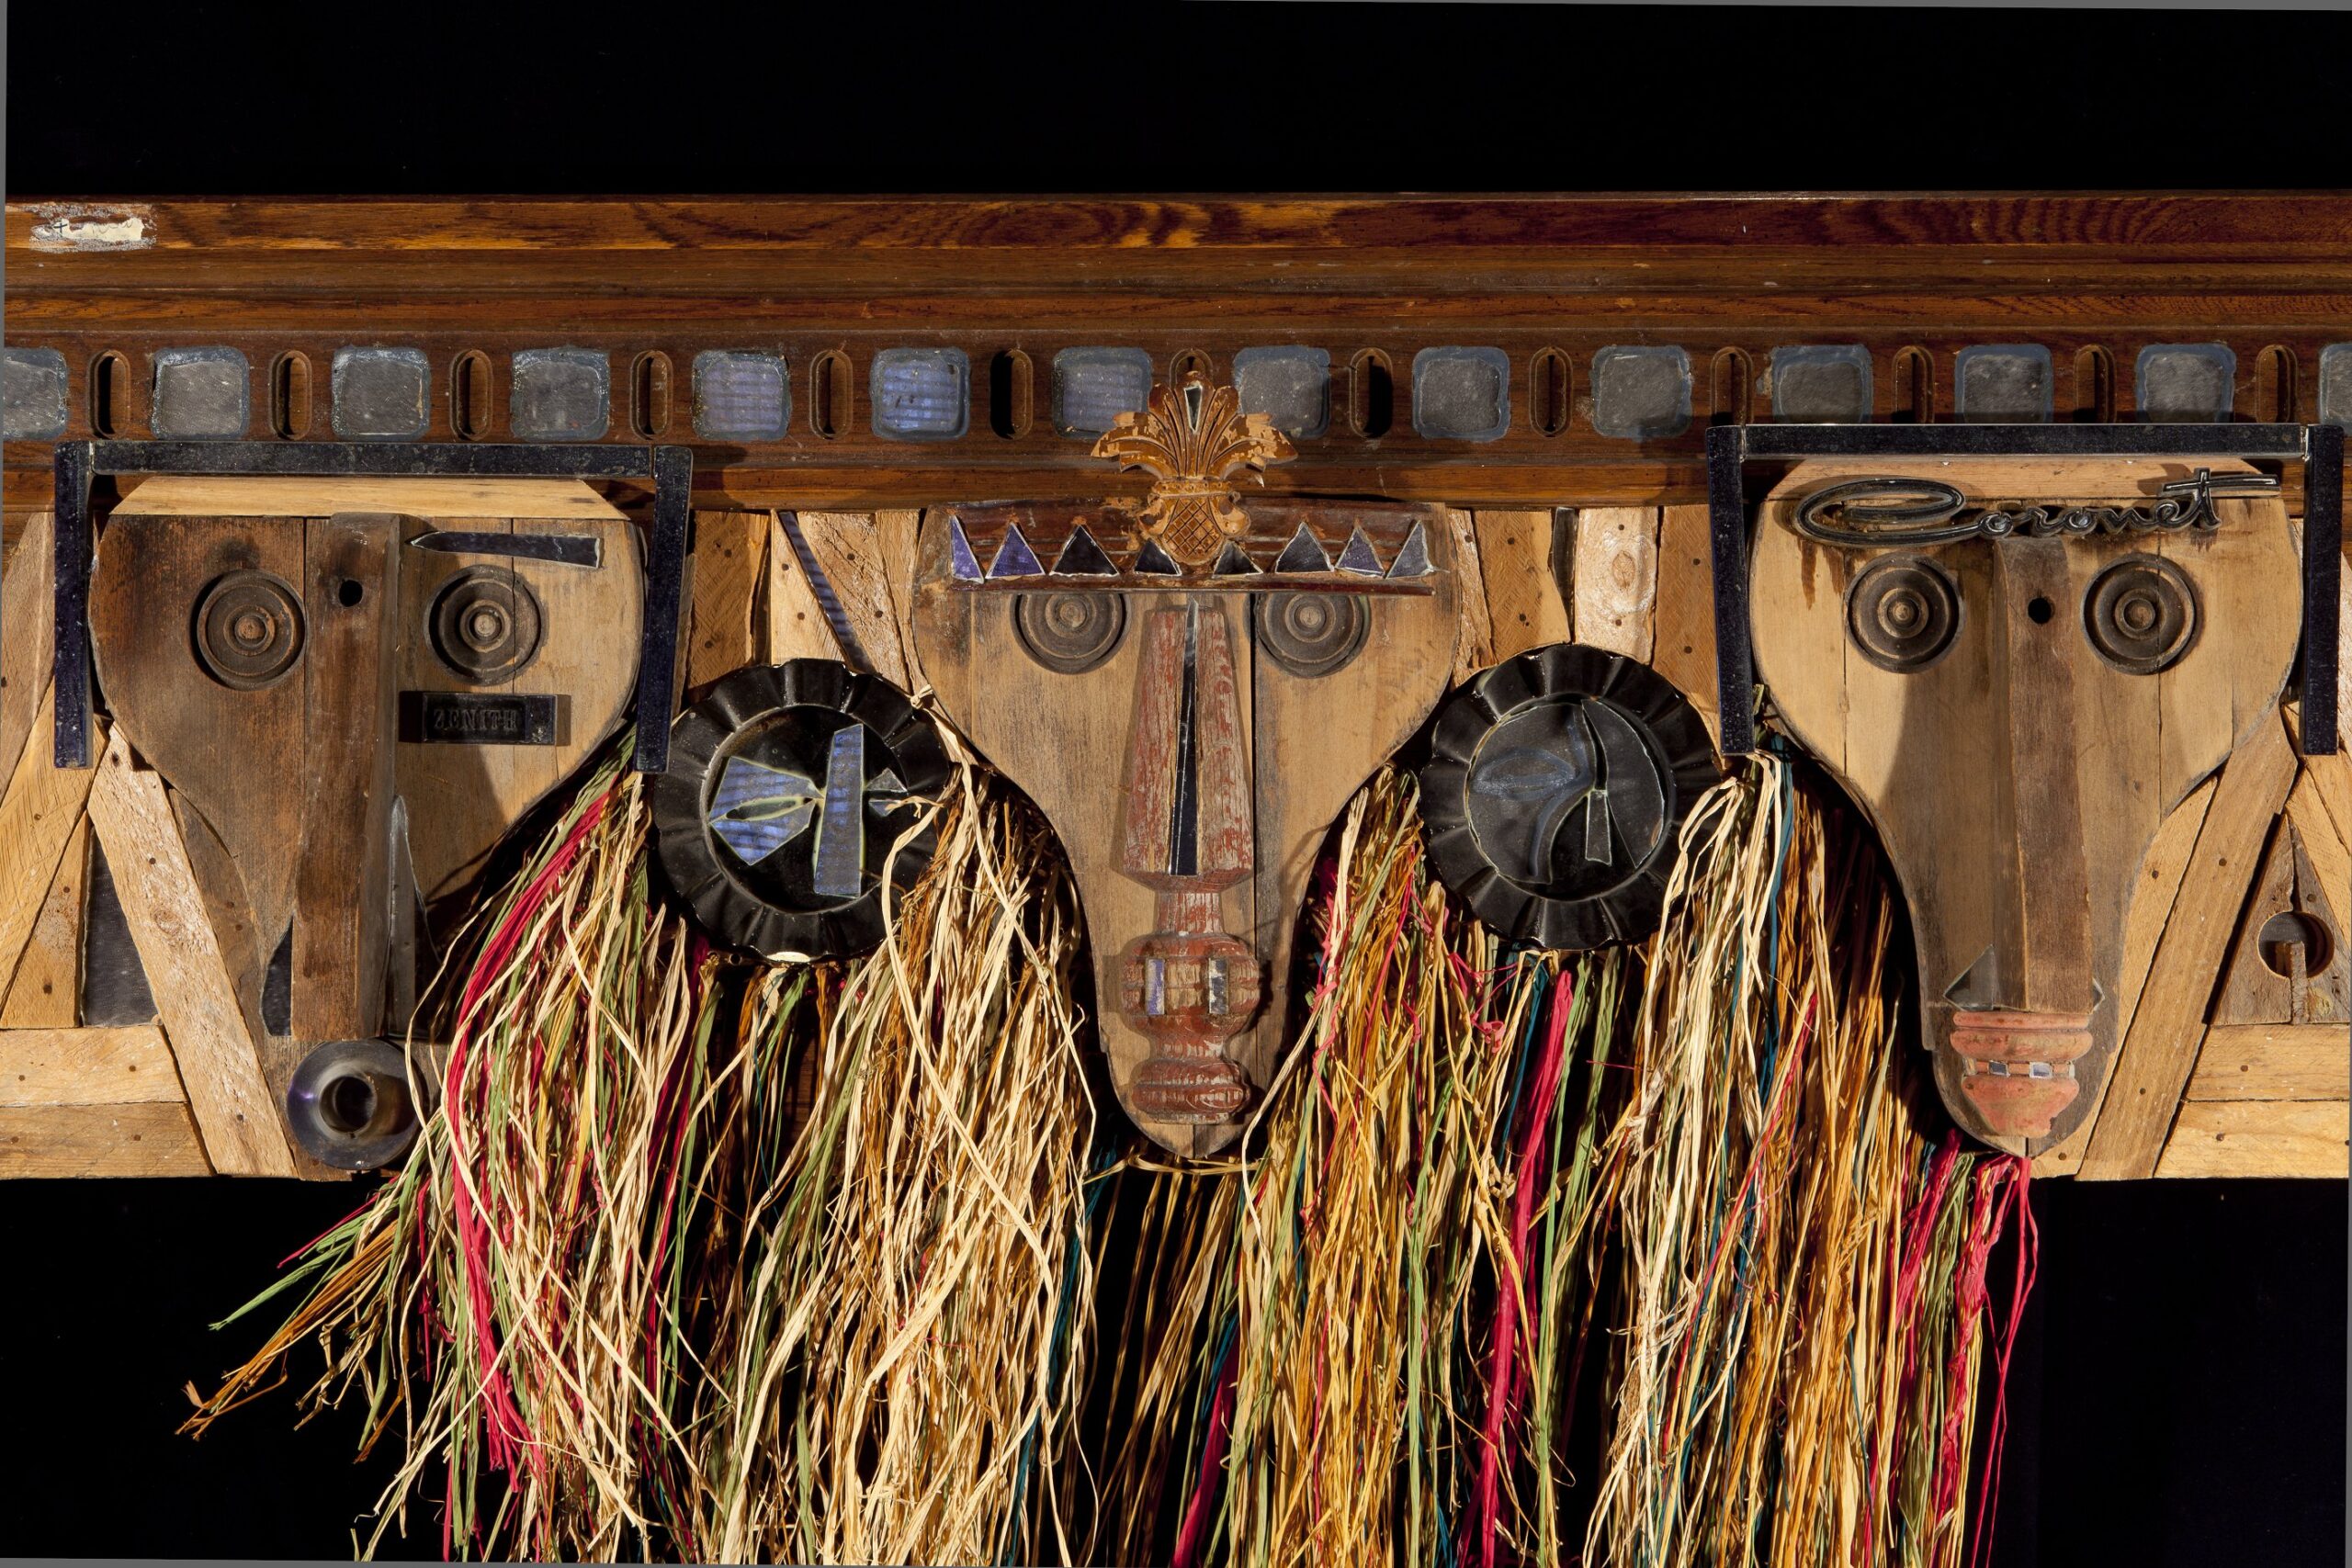 A wood wall sculpture of three faces with multi-colored rafia hanging from between the faces.